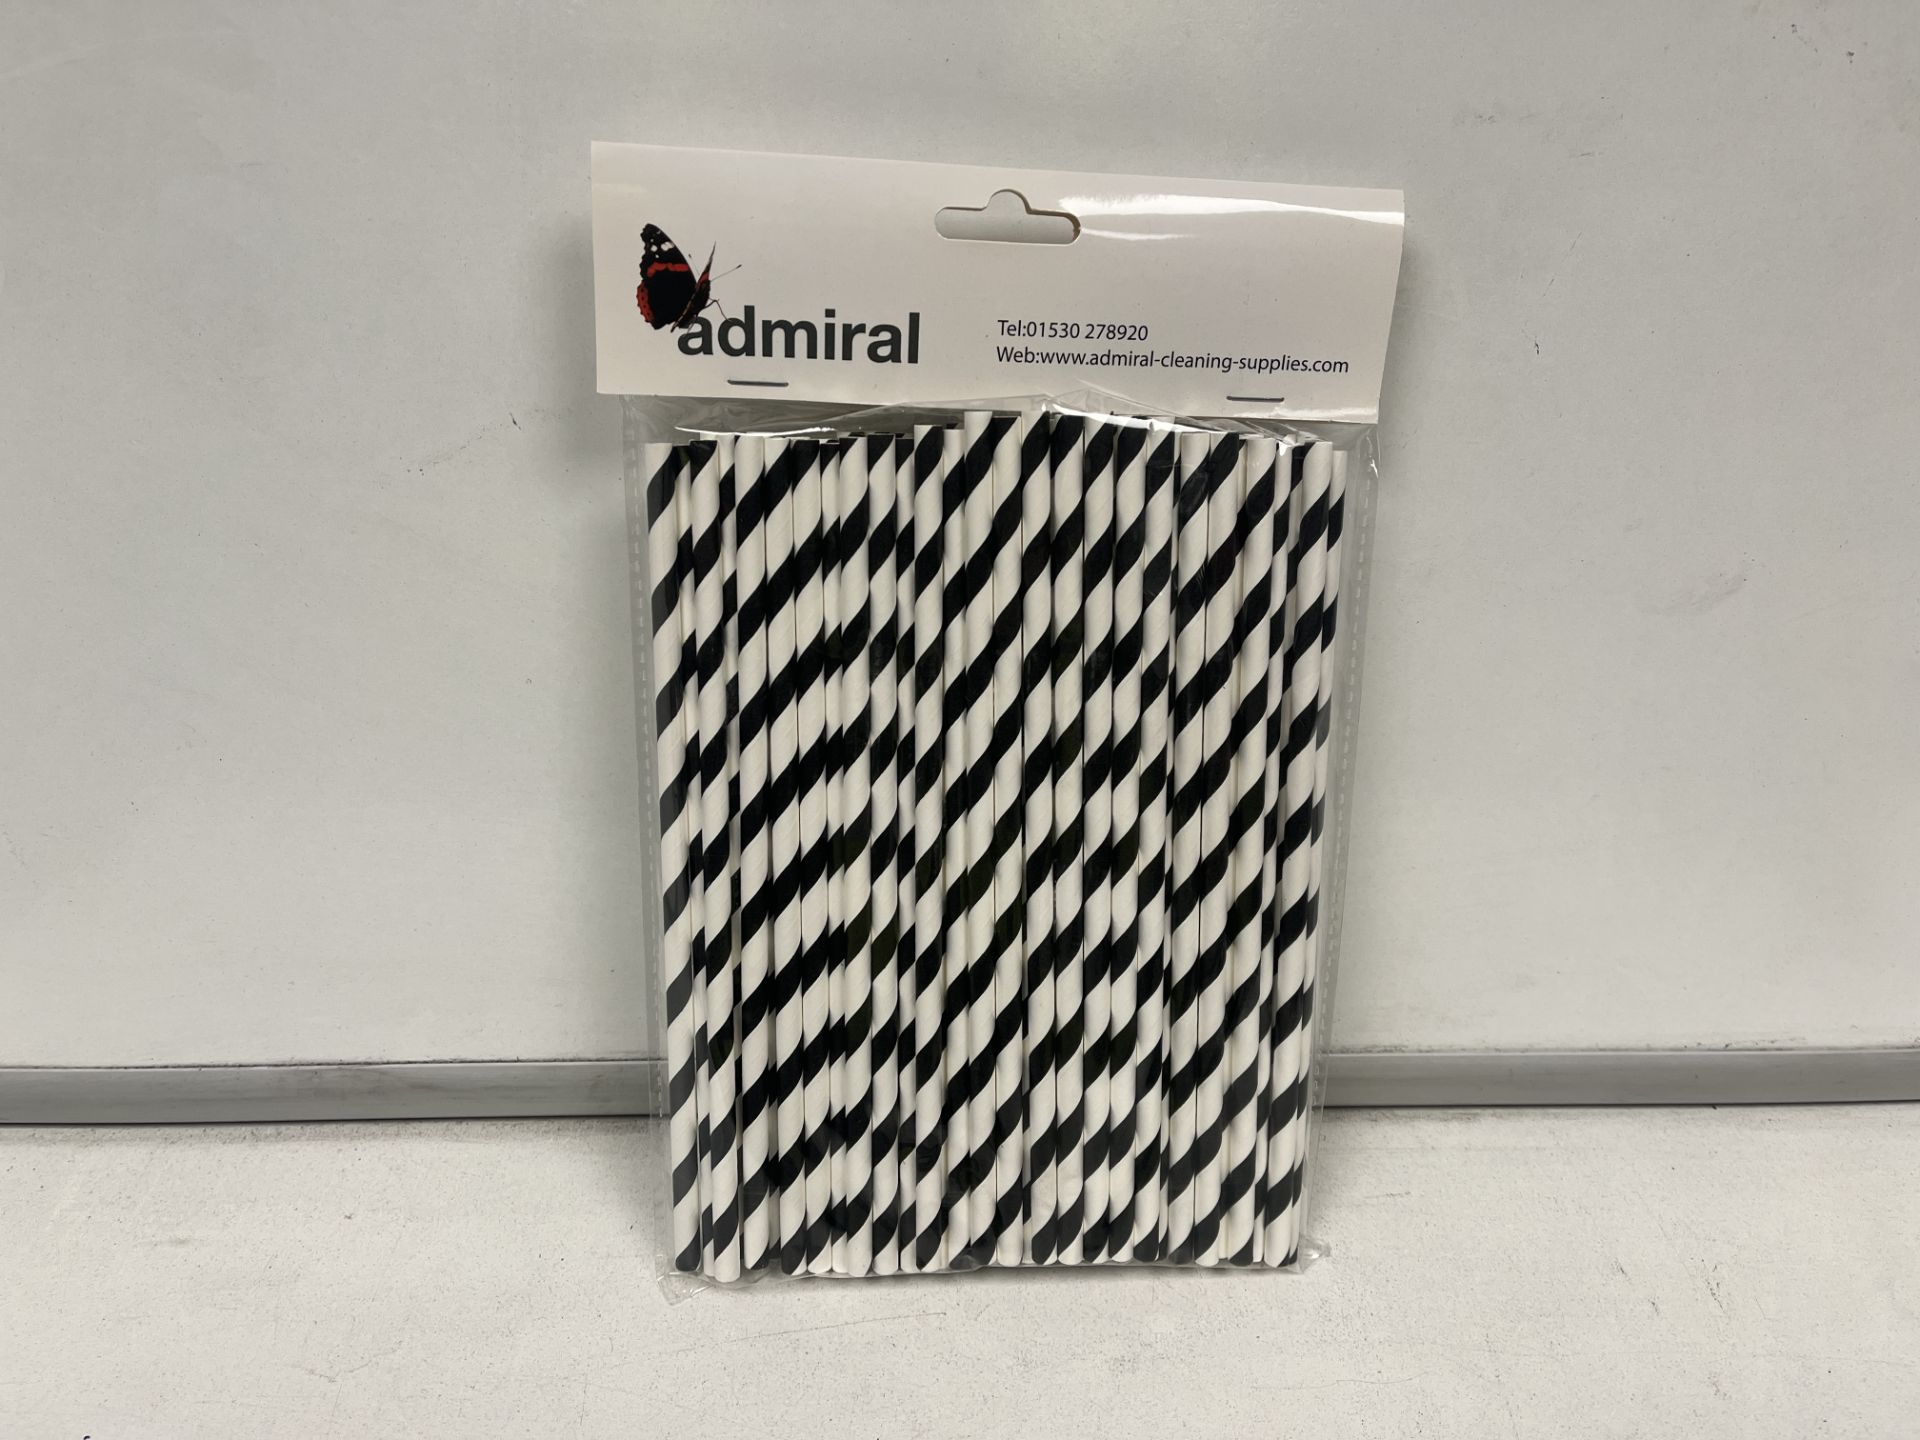 150 X BRAND NEW PACKS OF 100 ADMIRAL PAPER STRAWS RED AND WHITE R9-9